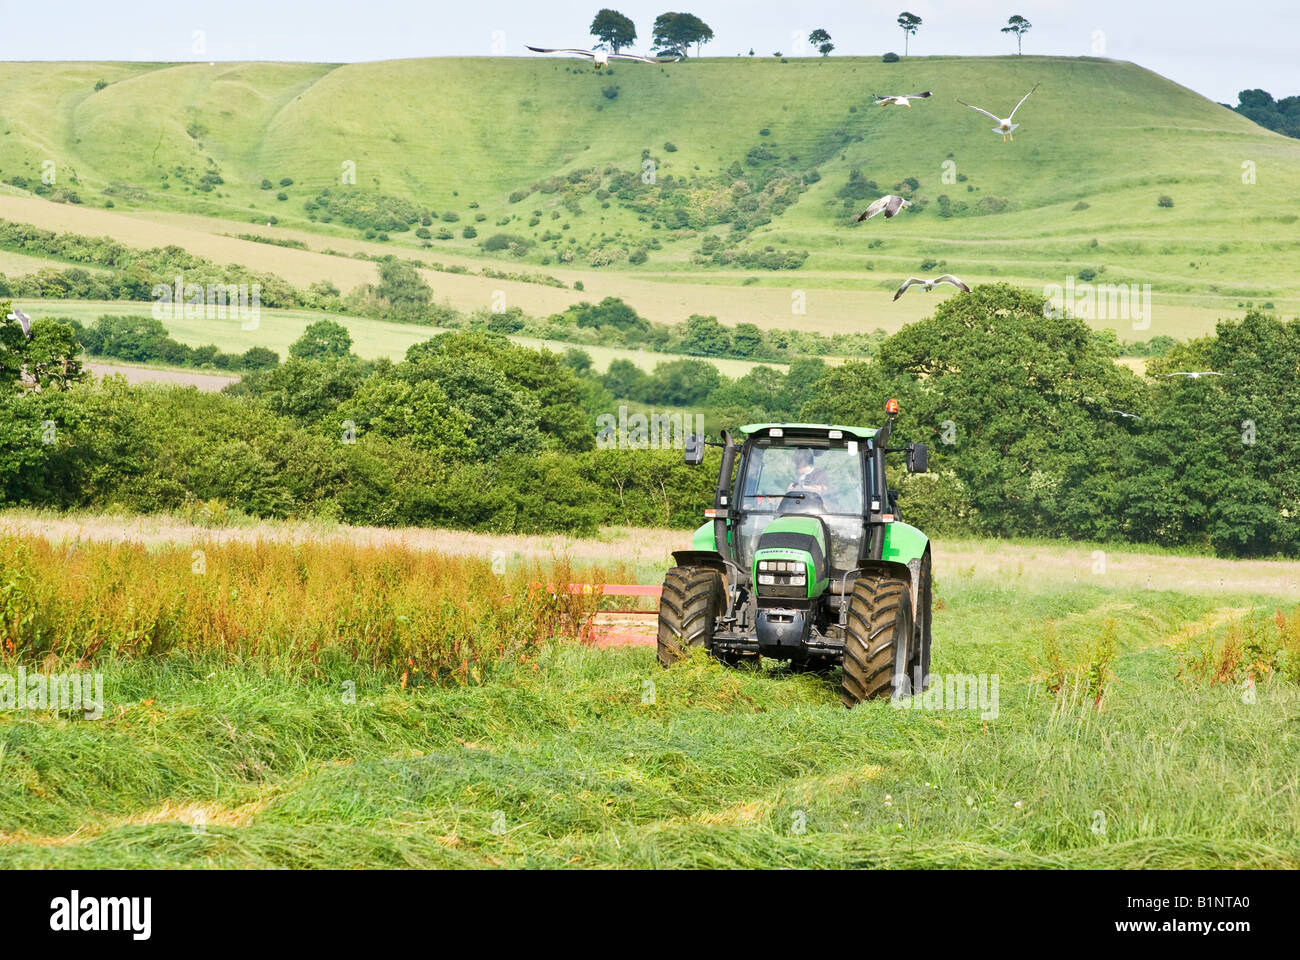 Deutz Fahr Tractor manufactured in Italy cutting silage in a Wiltshire field in June with seagulls soaring overhead Stock Photo